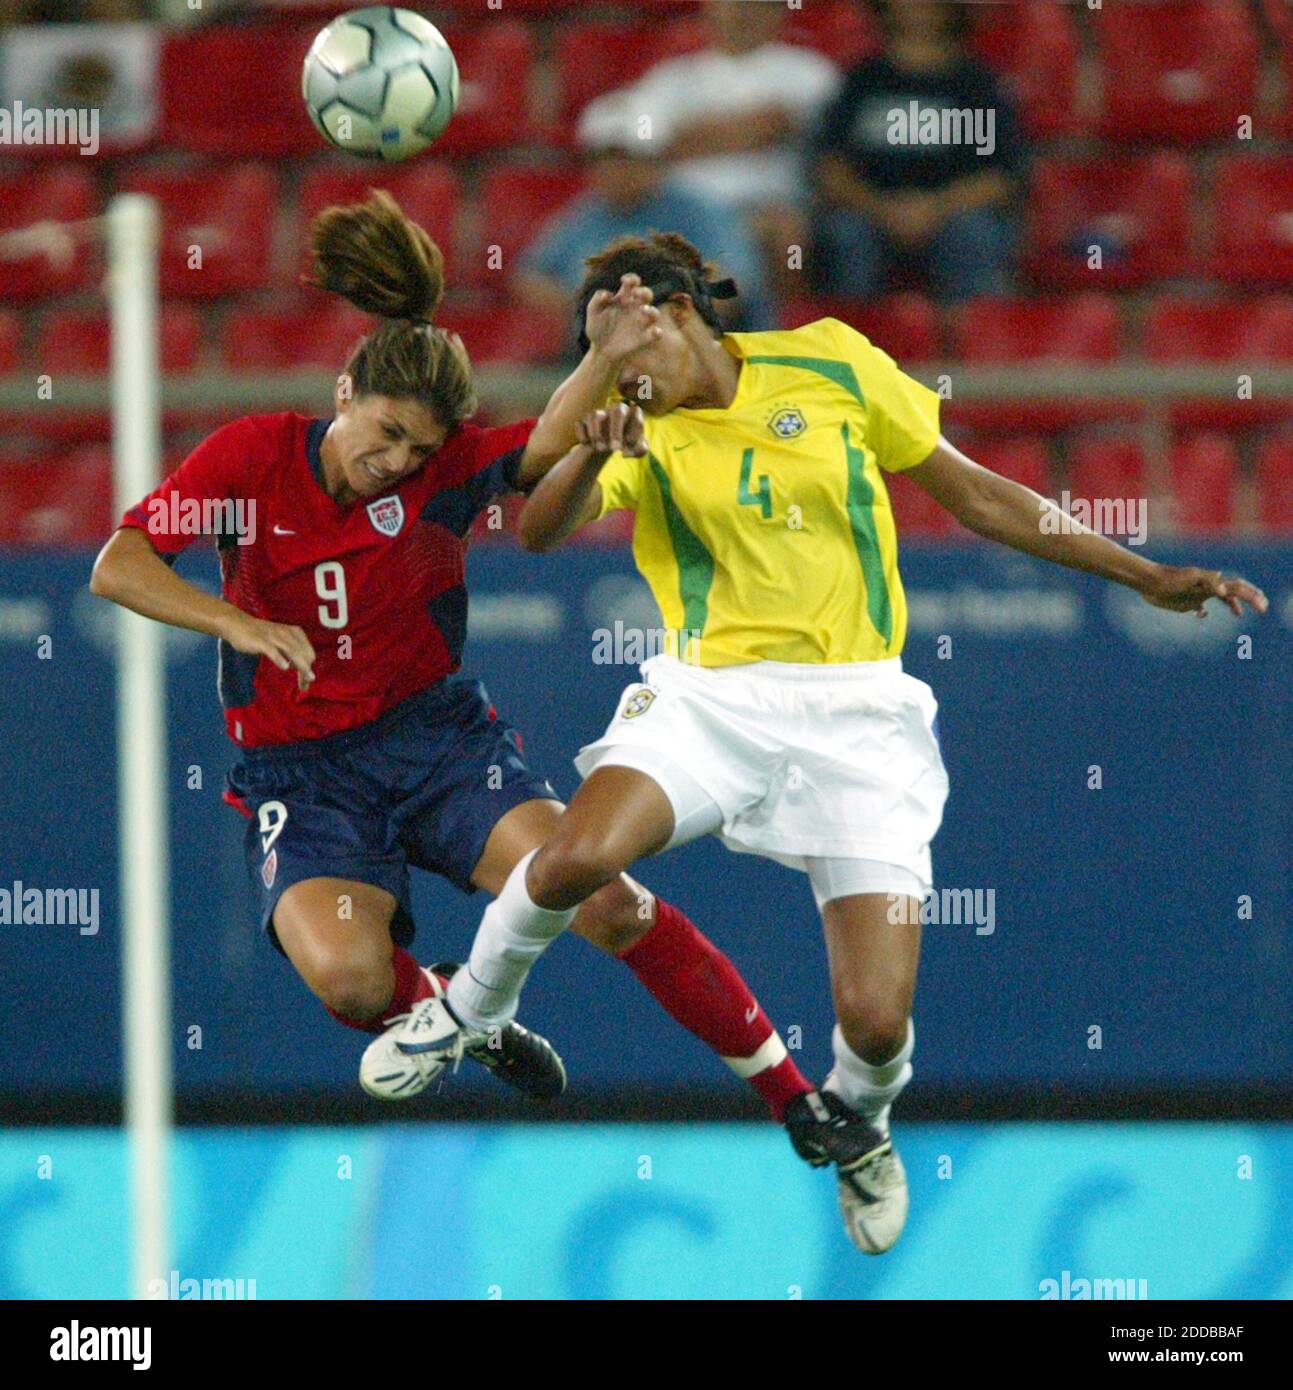 NO FILM, NO VIDEO, NO TV, NO DOCUMENTARY - Mia Hamm of the United States, left, and Brazil's Tania fight for a header in the first half of the gold medal soccer game in Athens August 26, 2004. The United States won the game 2-1 in double overtime. Photo by Mark Reis/Colorado Springs Gazette/KRT/AB Stock Photo